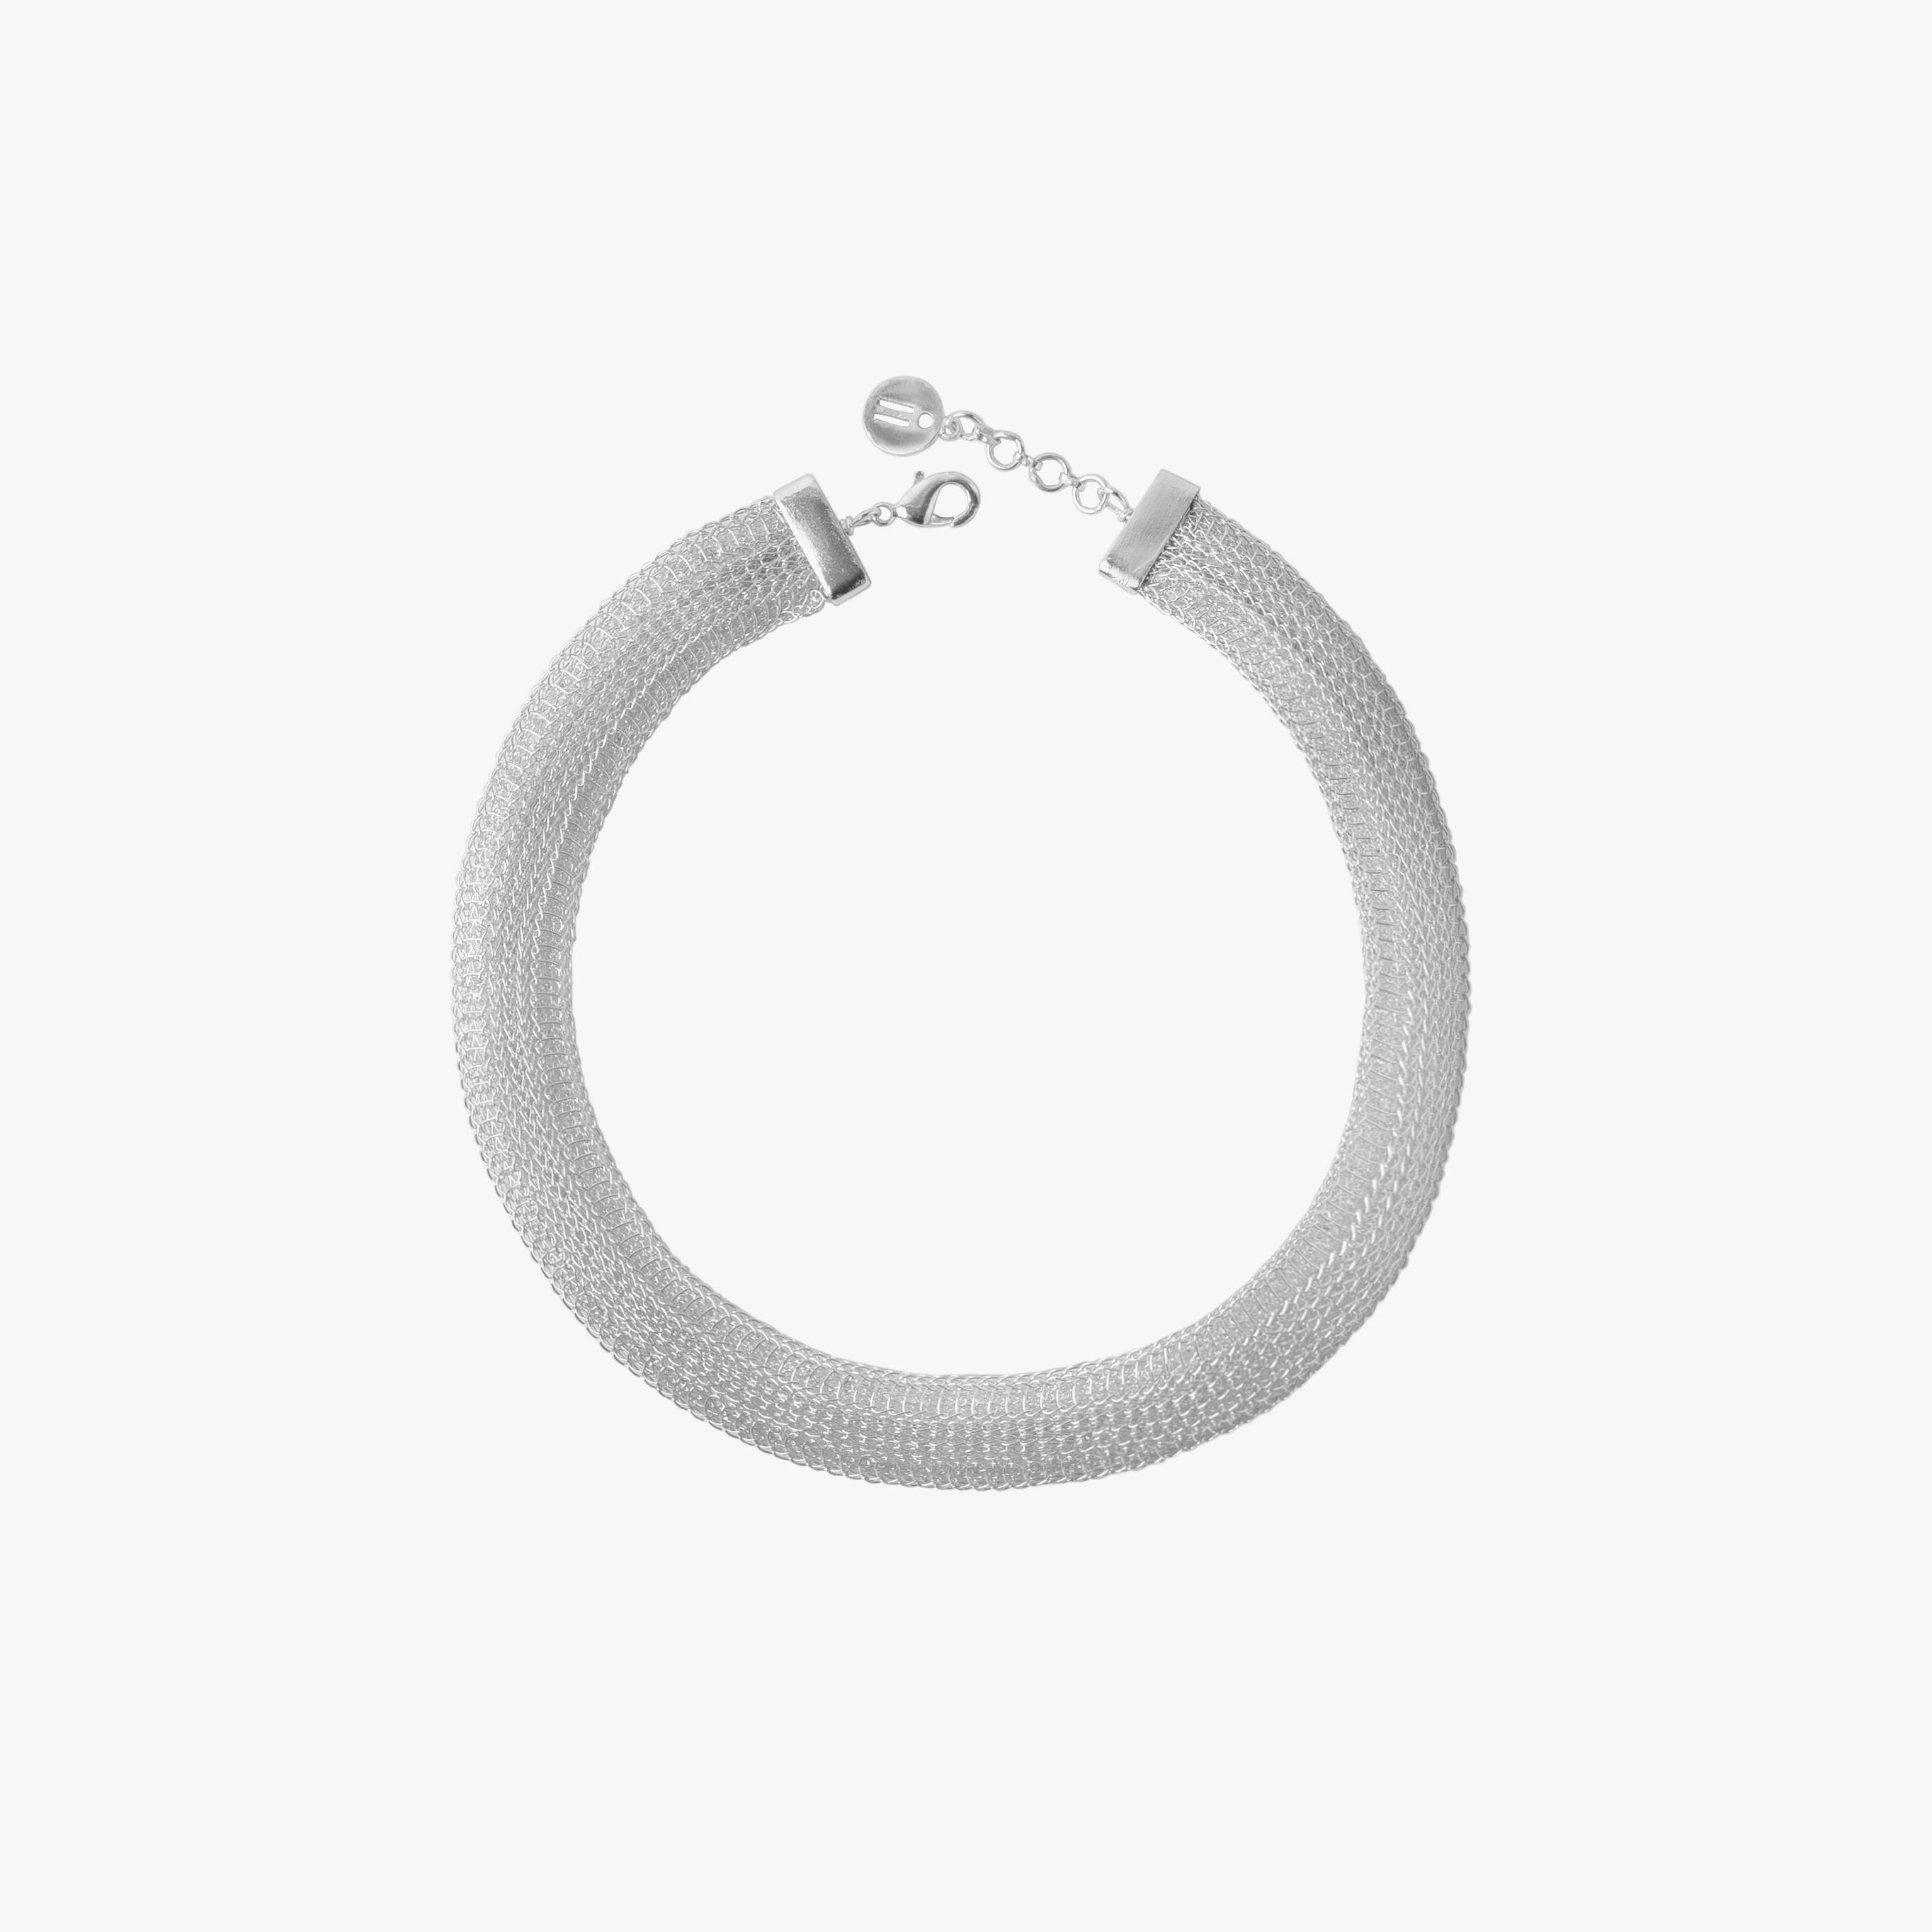 TIME TO SHINE COLLAR SILVER TONE , a product by Equiivalence